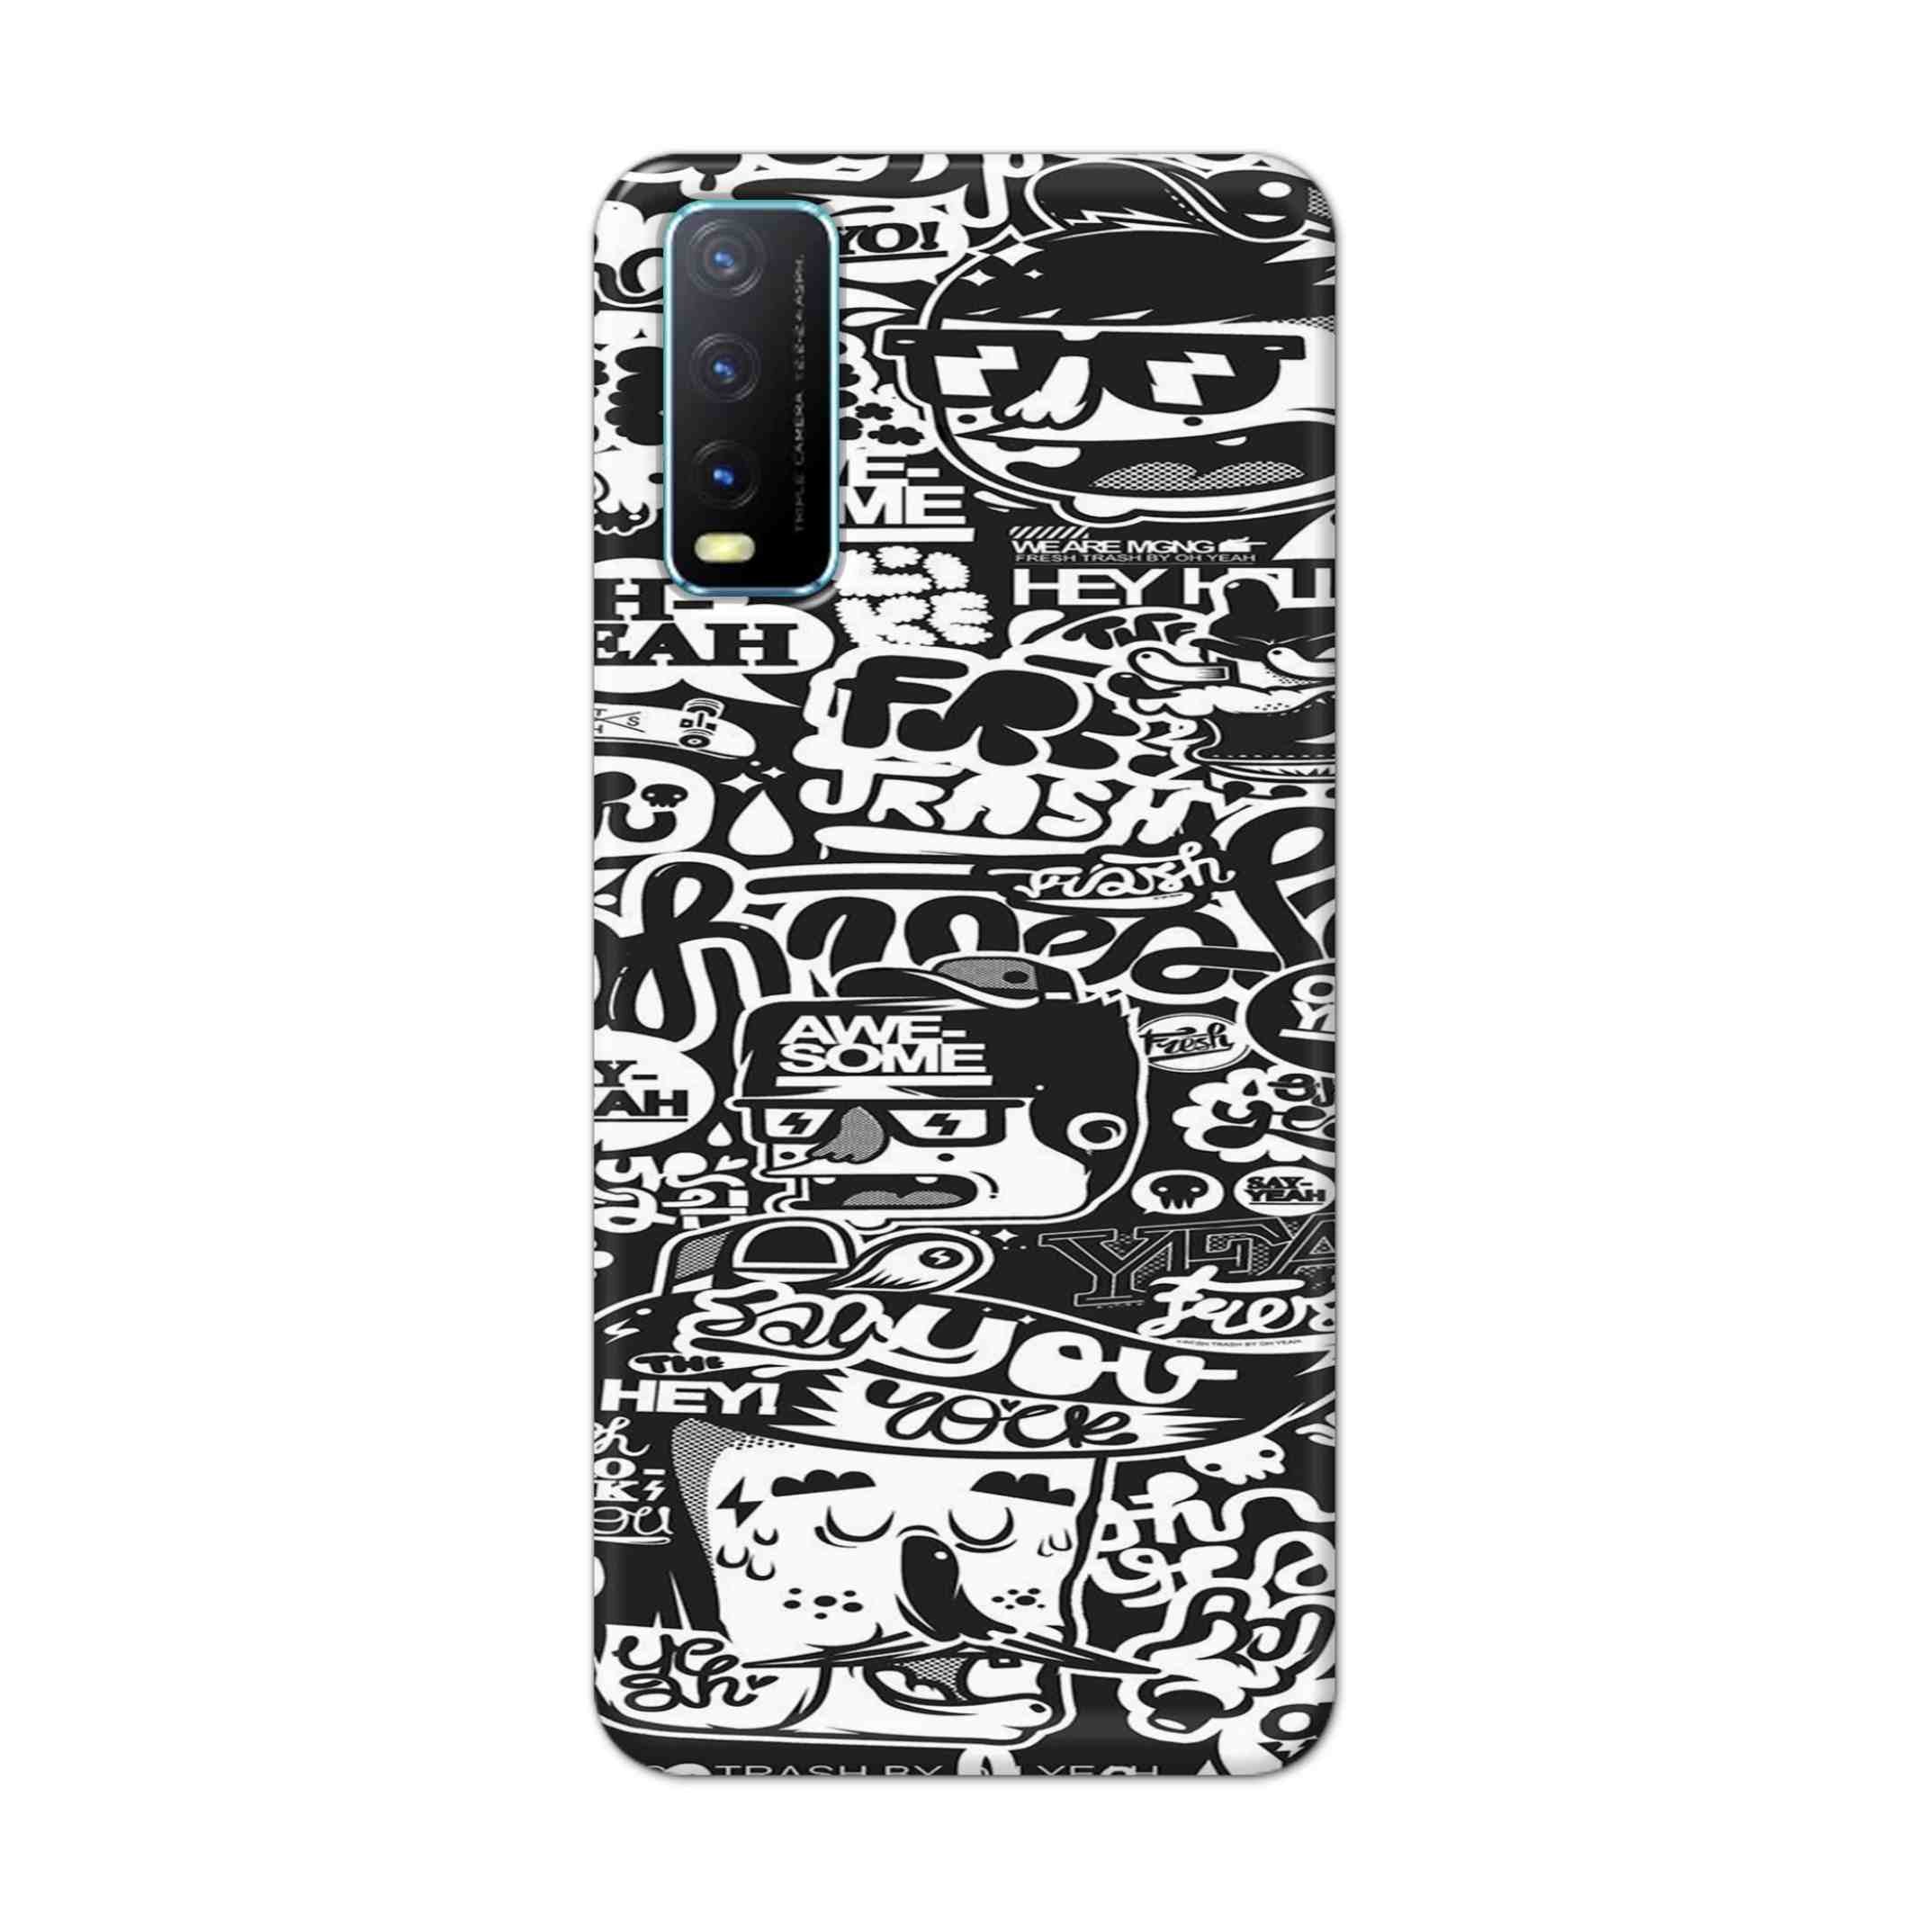 Buy Awesome Hard Back Mobile Phone Case Cover For Vivo Y20 Online